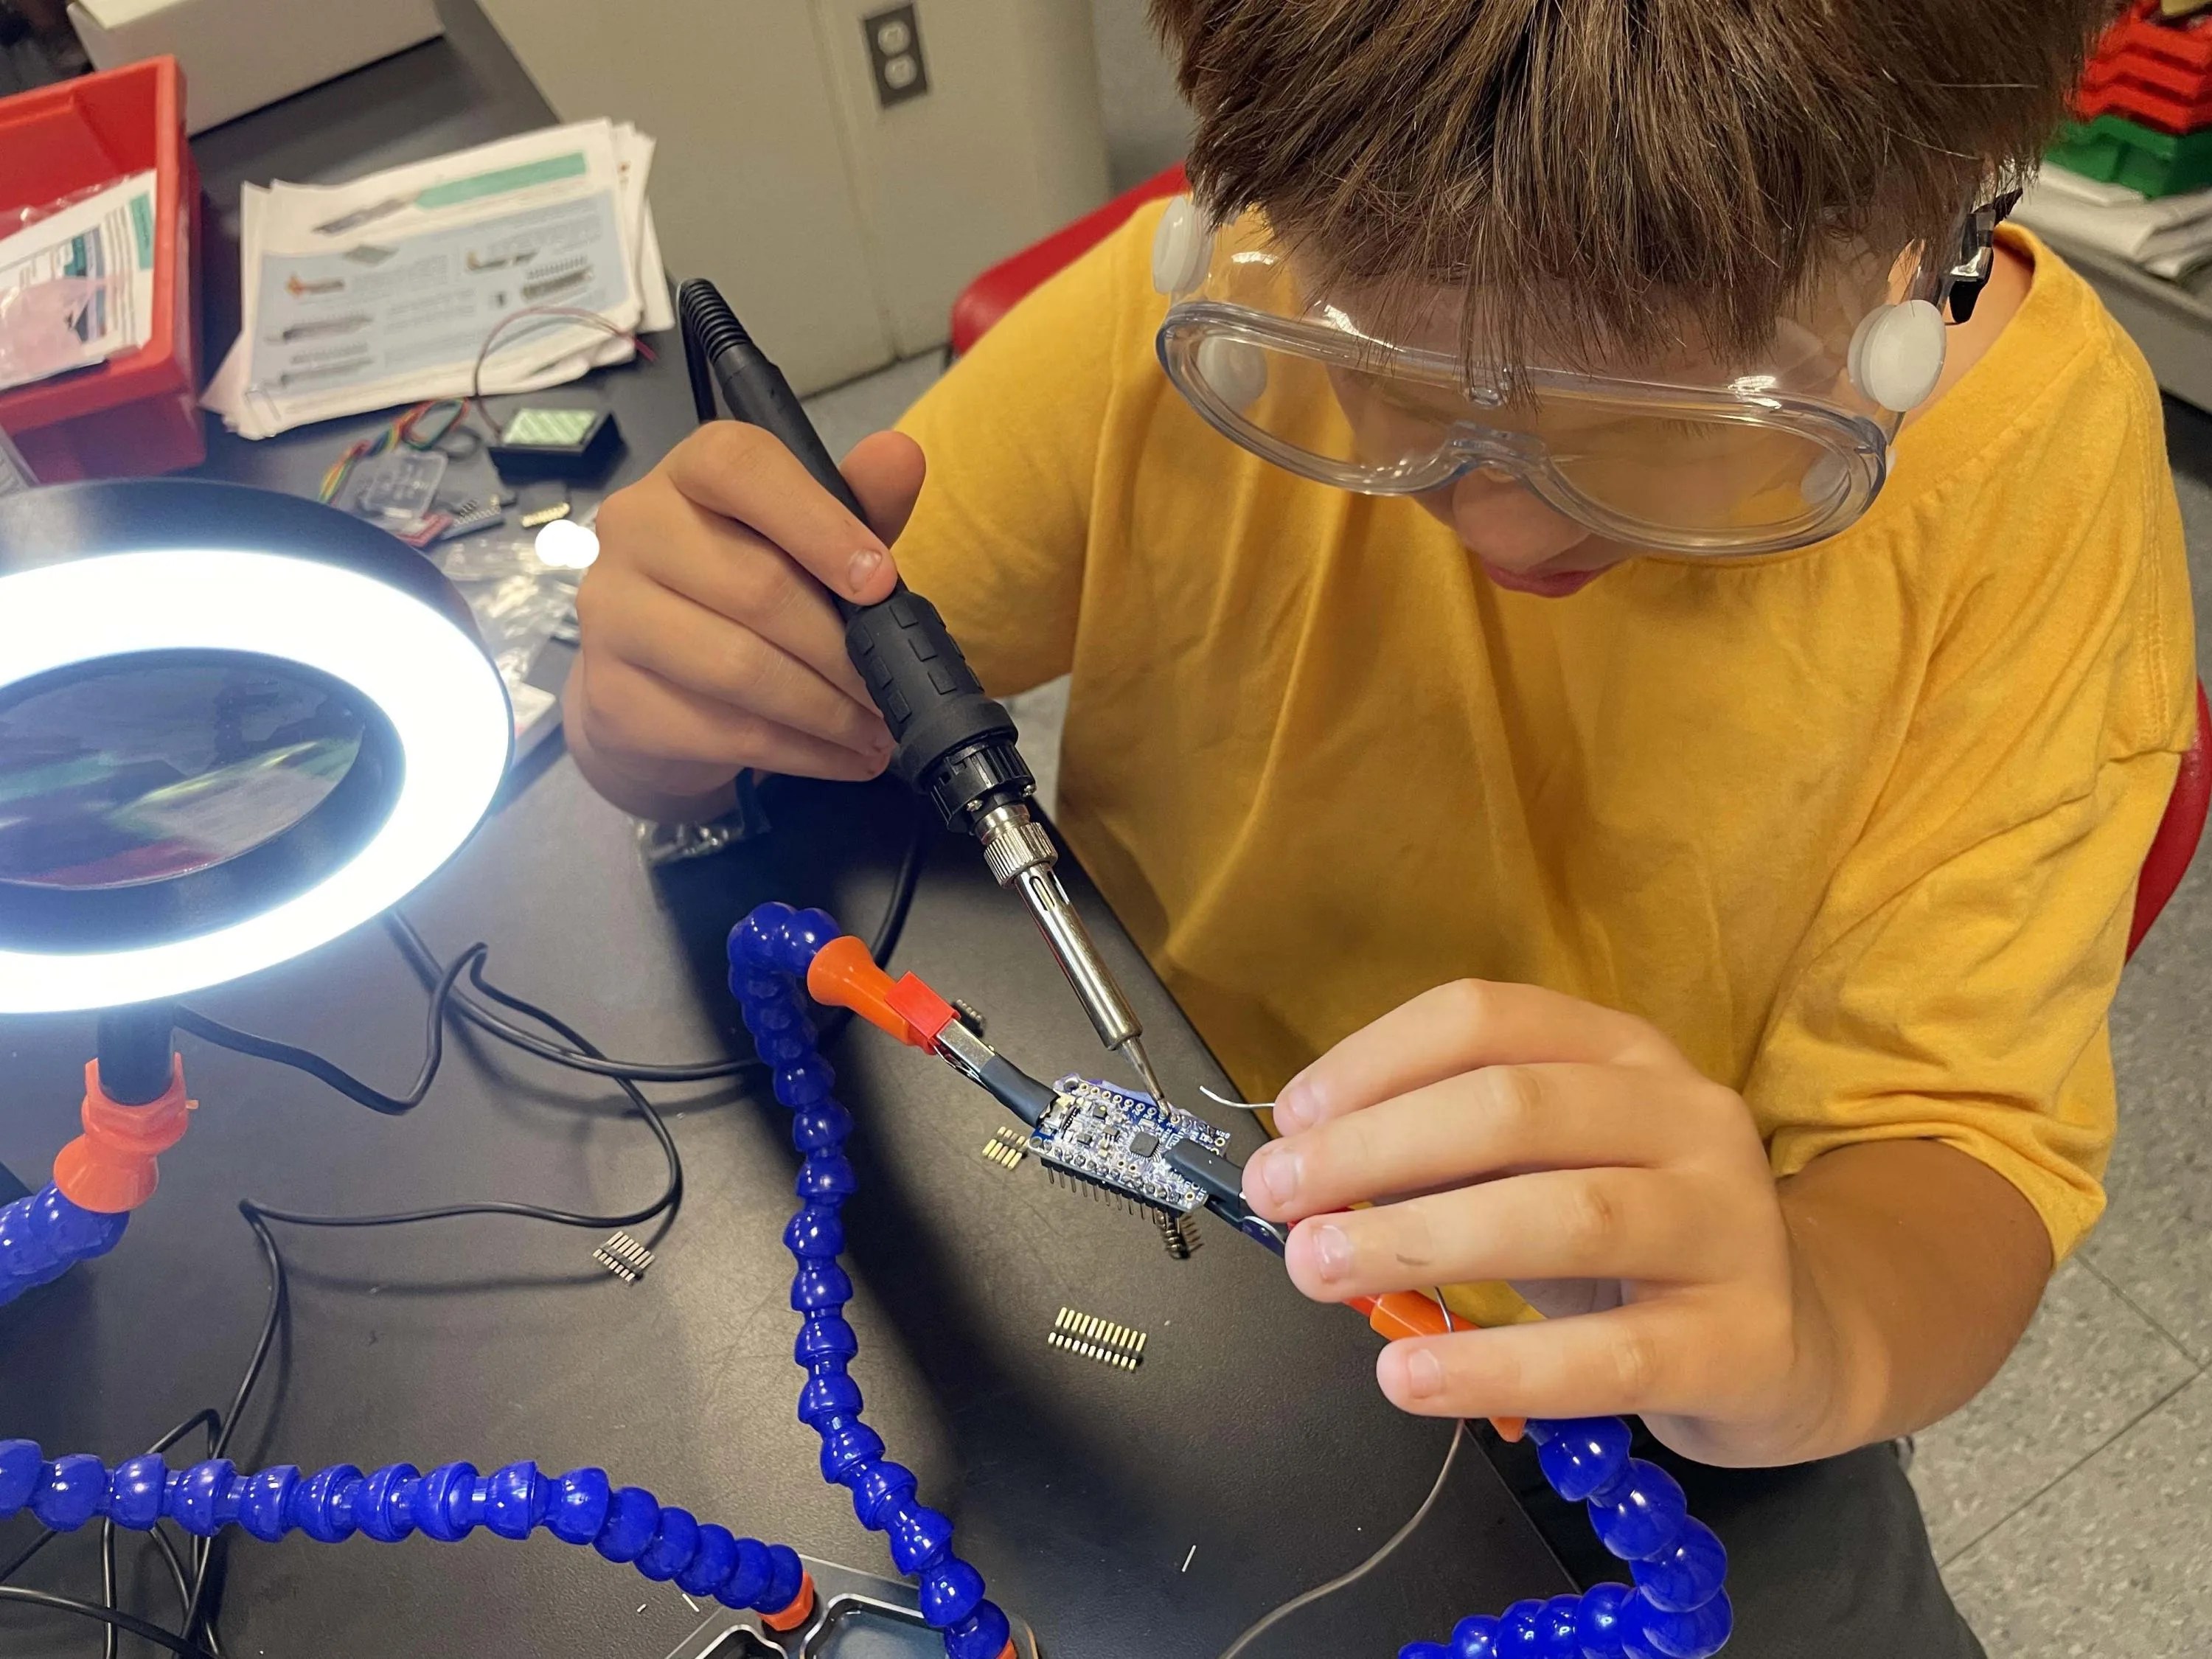 Photo of middle school camp attendee soldering the microprocessor used in the rocket payload. The microprocessor is held by clips attached to moveable arms for ease of access.